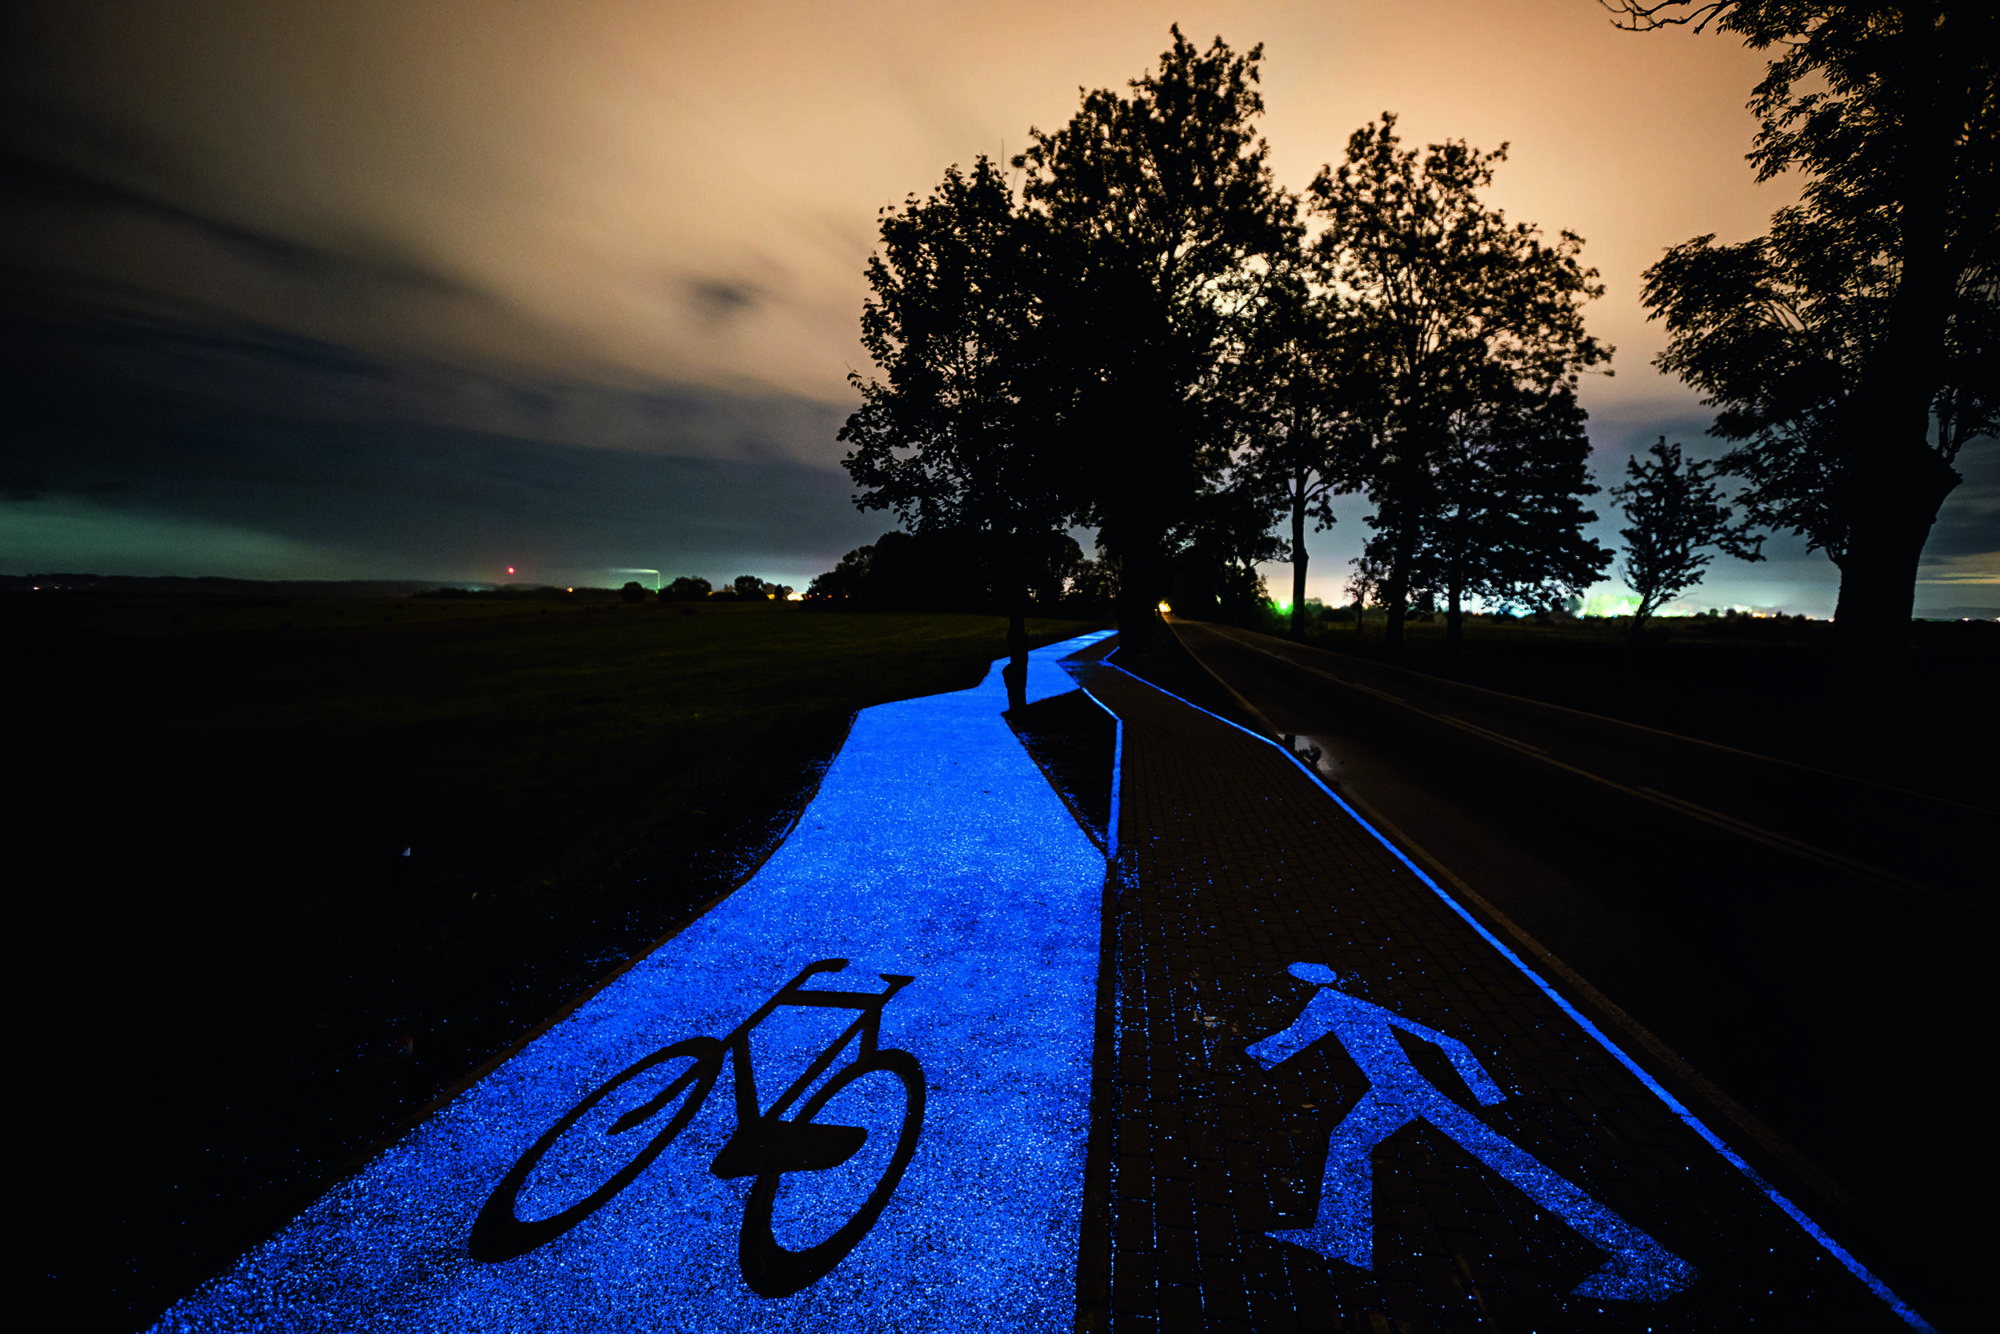 A cycle path and pedestrian path glow blue as the sun sets.